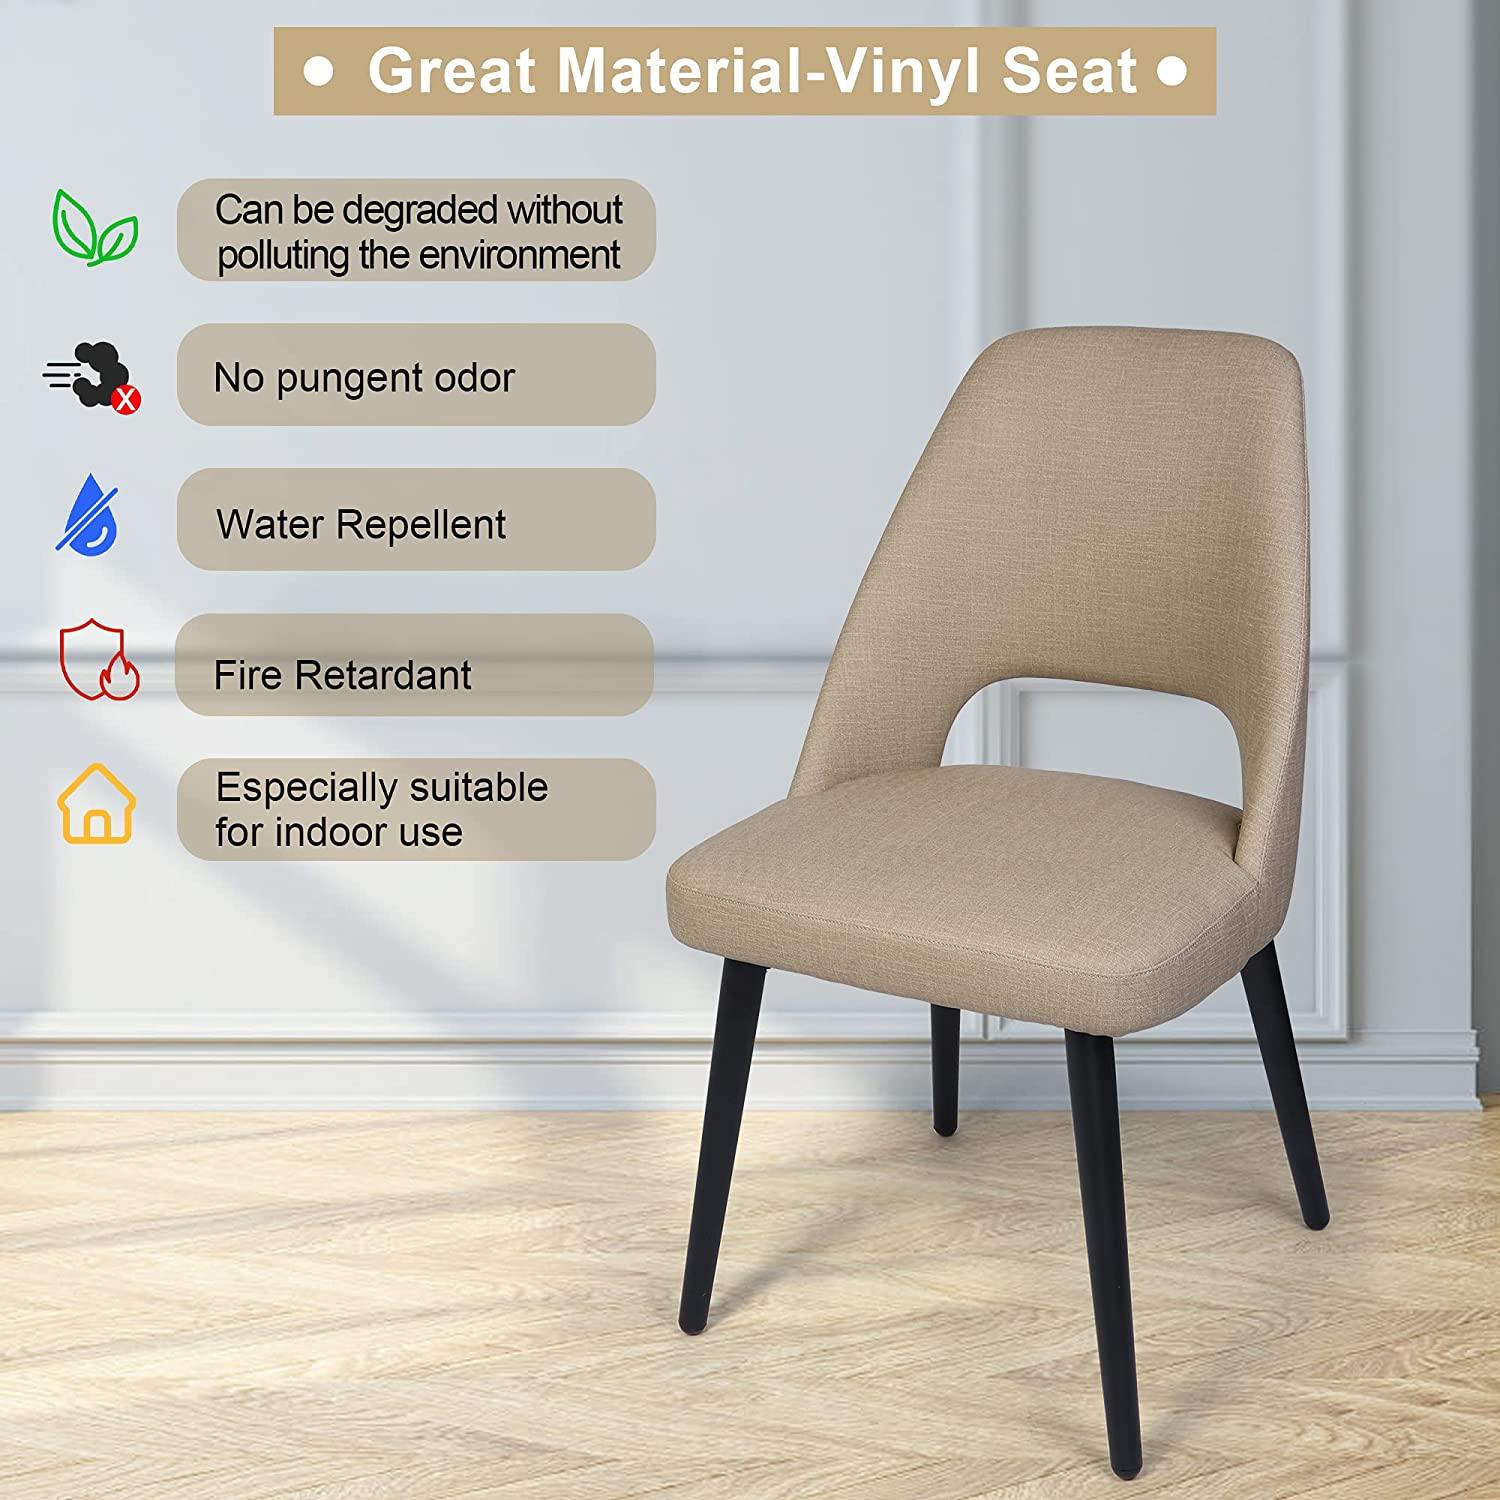 Set of 2 Kitchen Dining Room Chair with Fire Retardant & Water Repellent Vinyl Leather Seat - Bosonshop